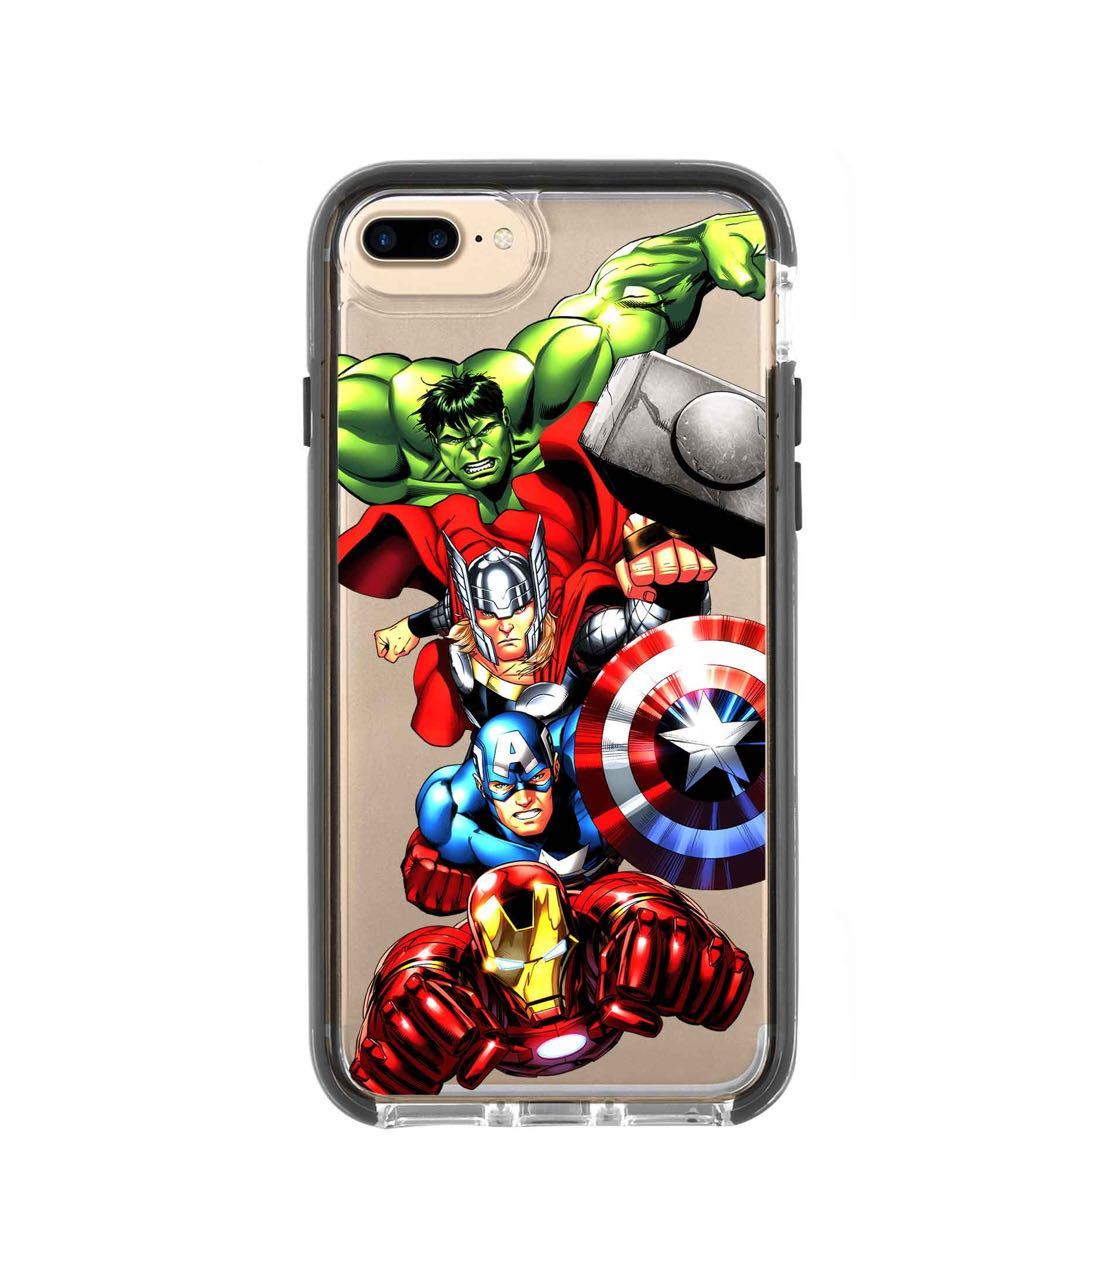 Avengers Fury - Extreme Phone Case for iPhone 7 Plus